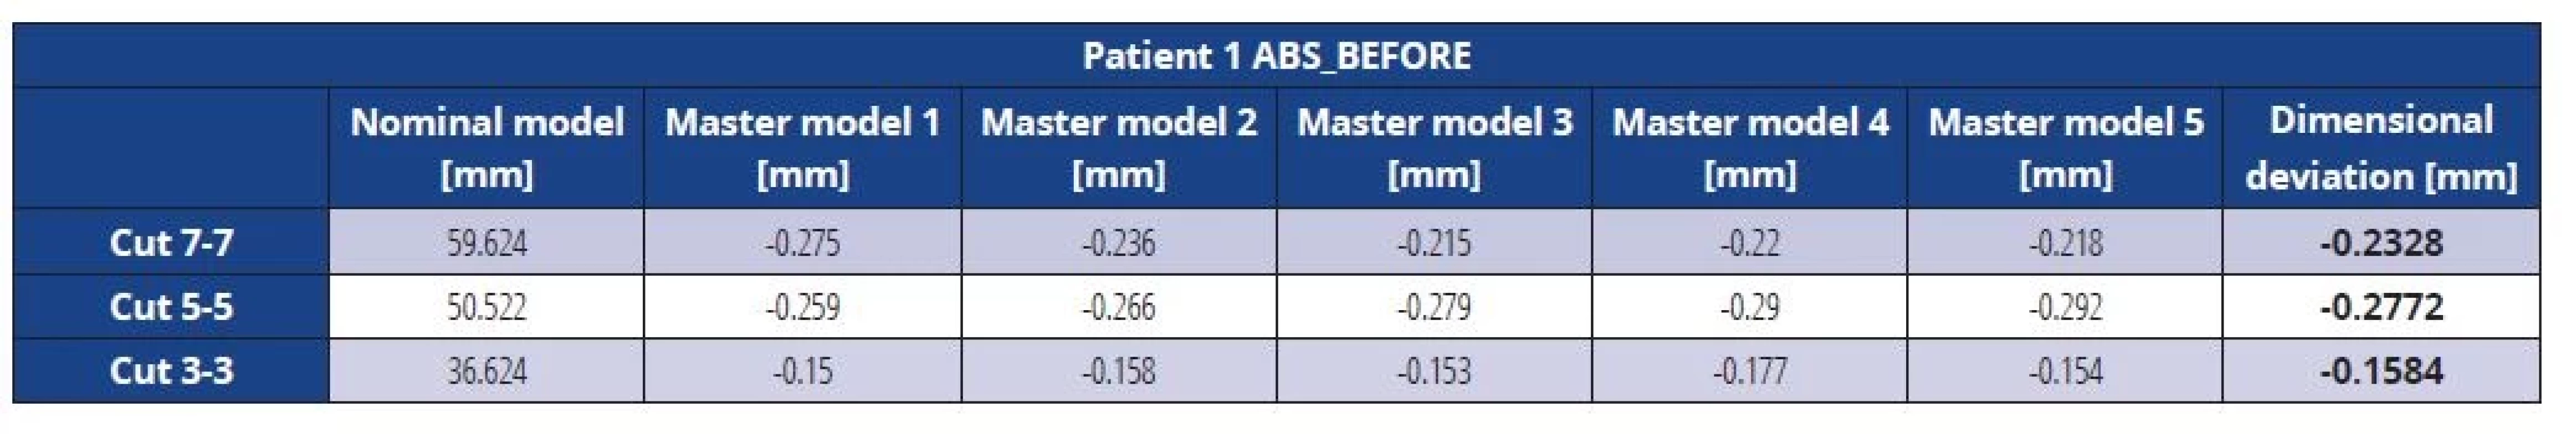 Dimensional deviations of the ABS master model before vacuuming (patient 1)